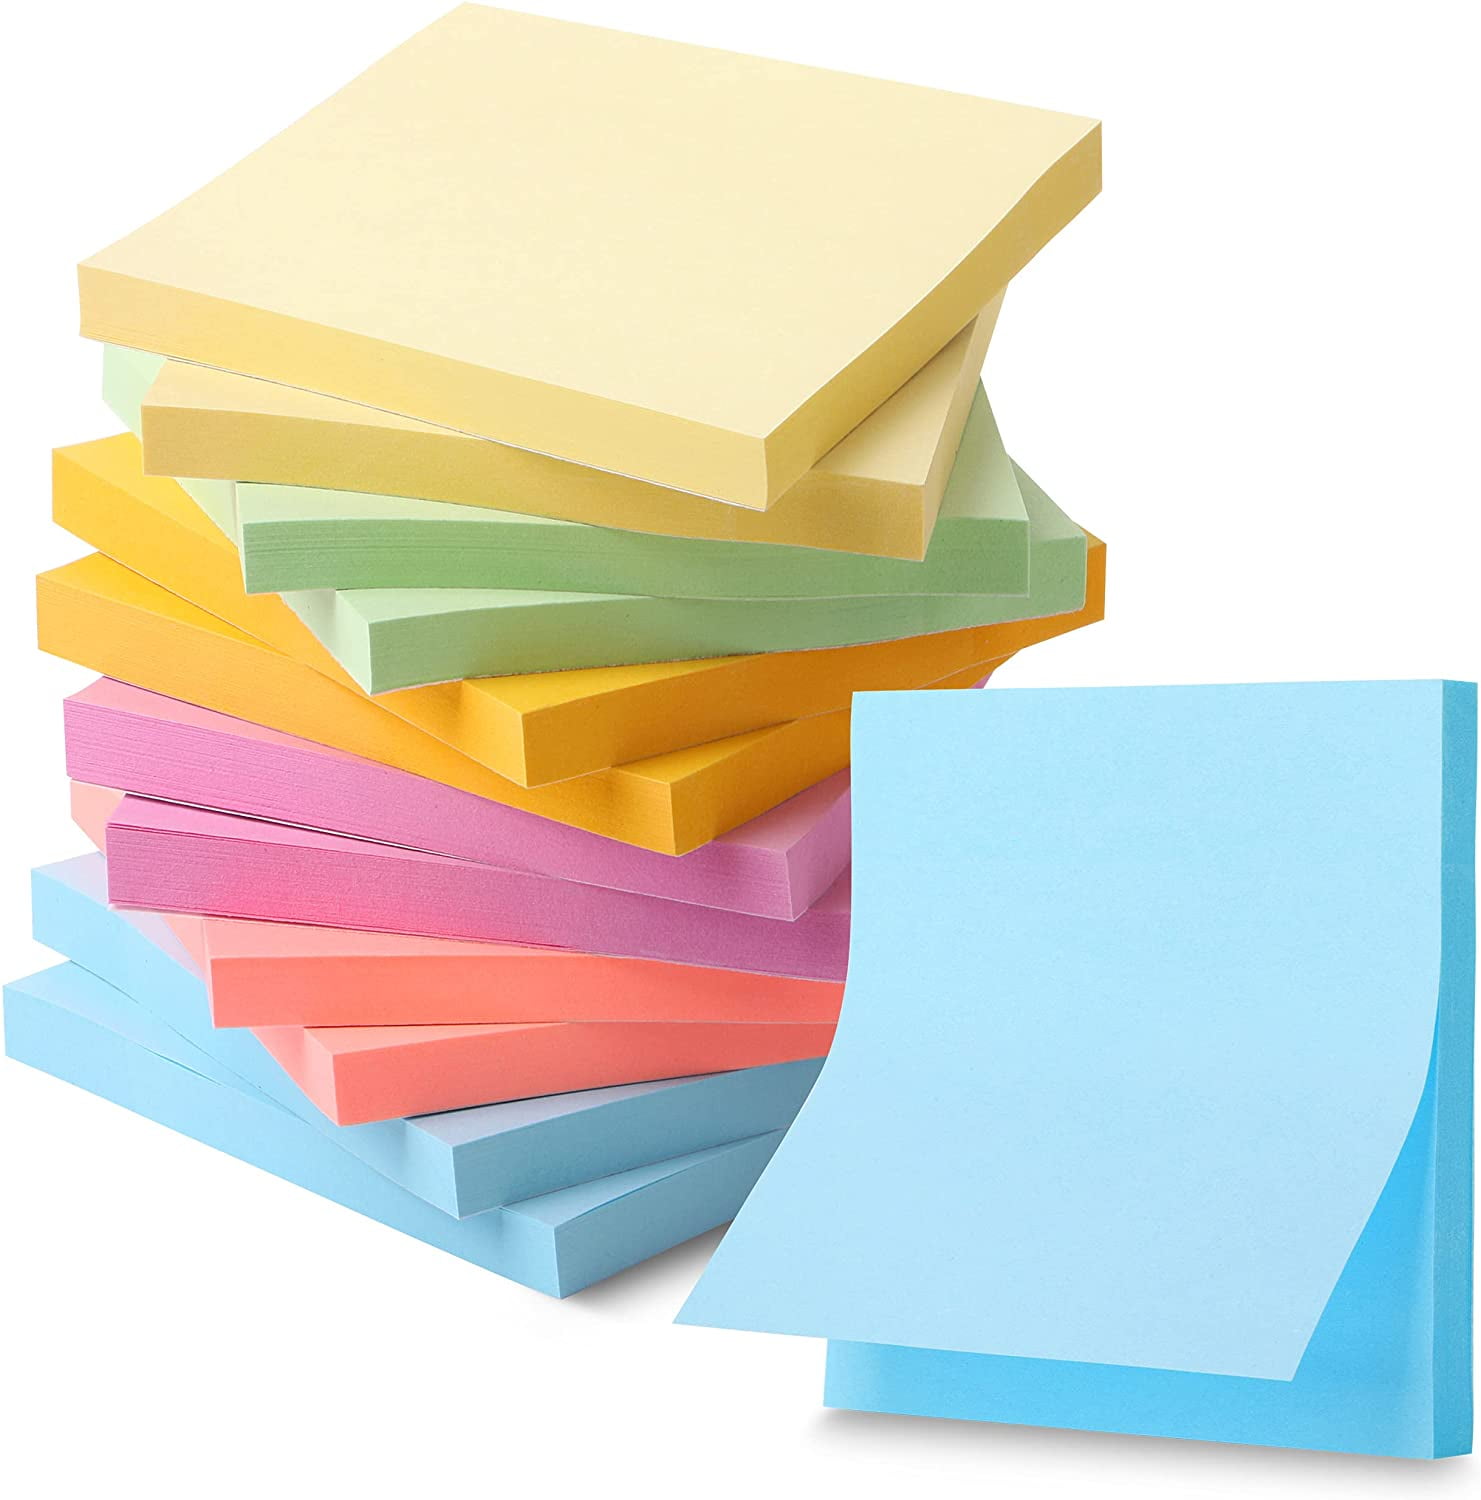 Mr. Pen- Floral Sticky Notes, 3x3, 12 Pads, 696 Sheets, Bible Sticky  Notes, Cute Sticky Notes, Religious Sticky Notes, Colored Sticky Notes,  Sticky